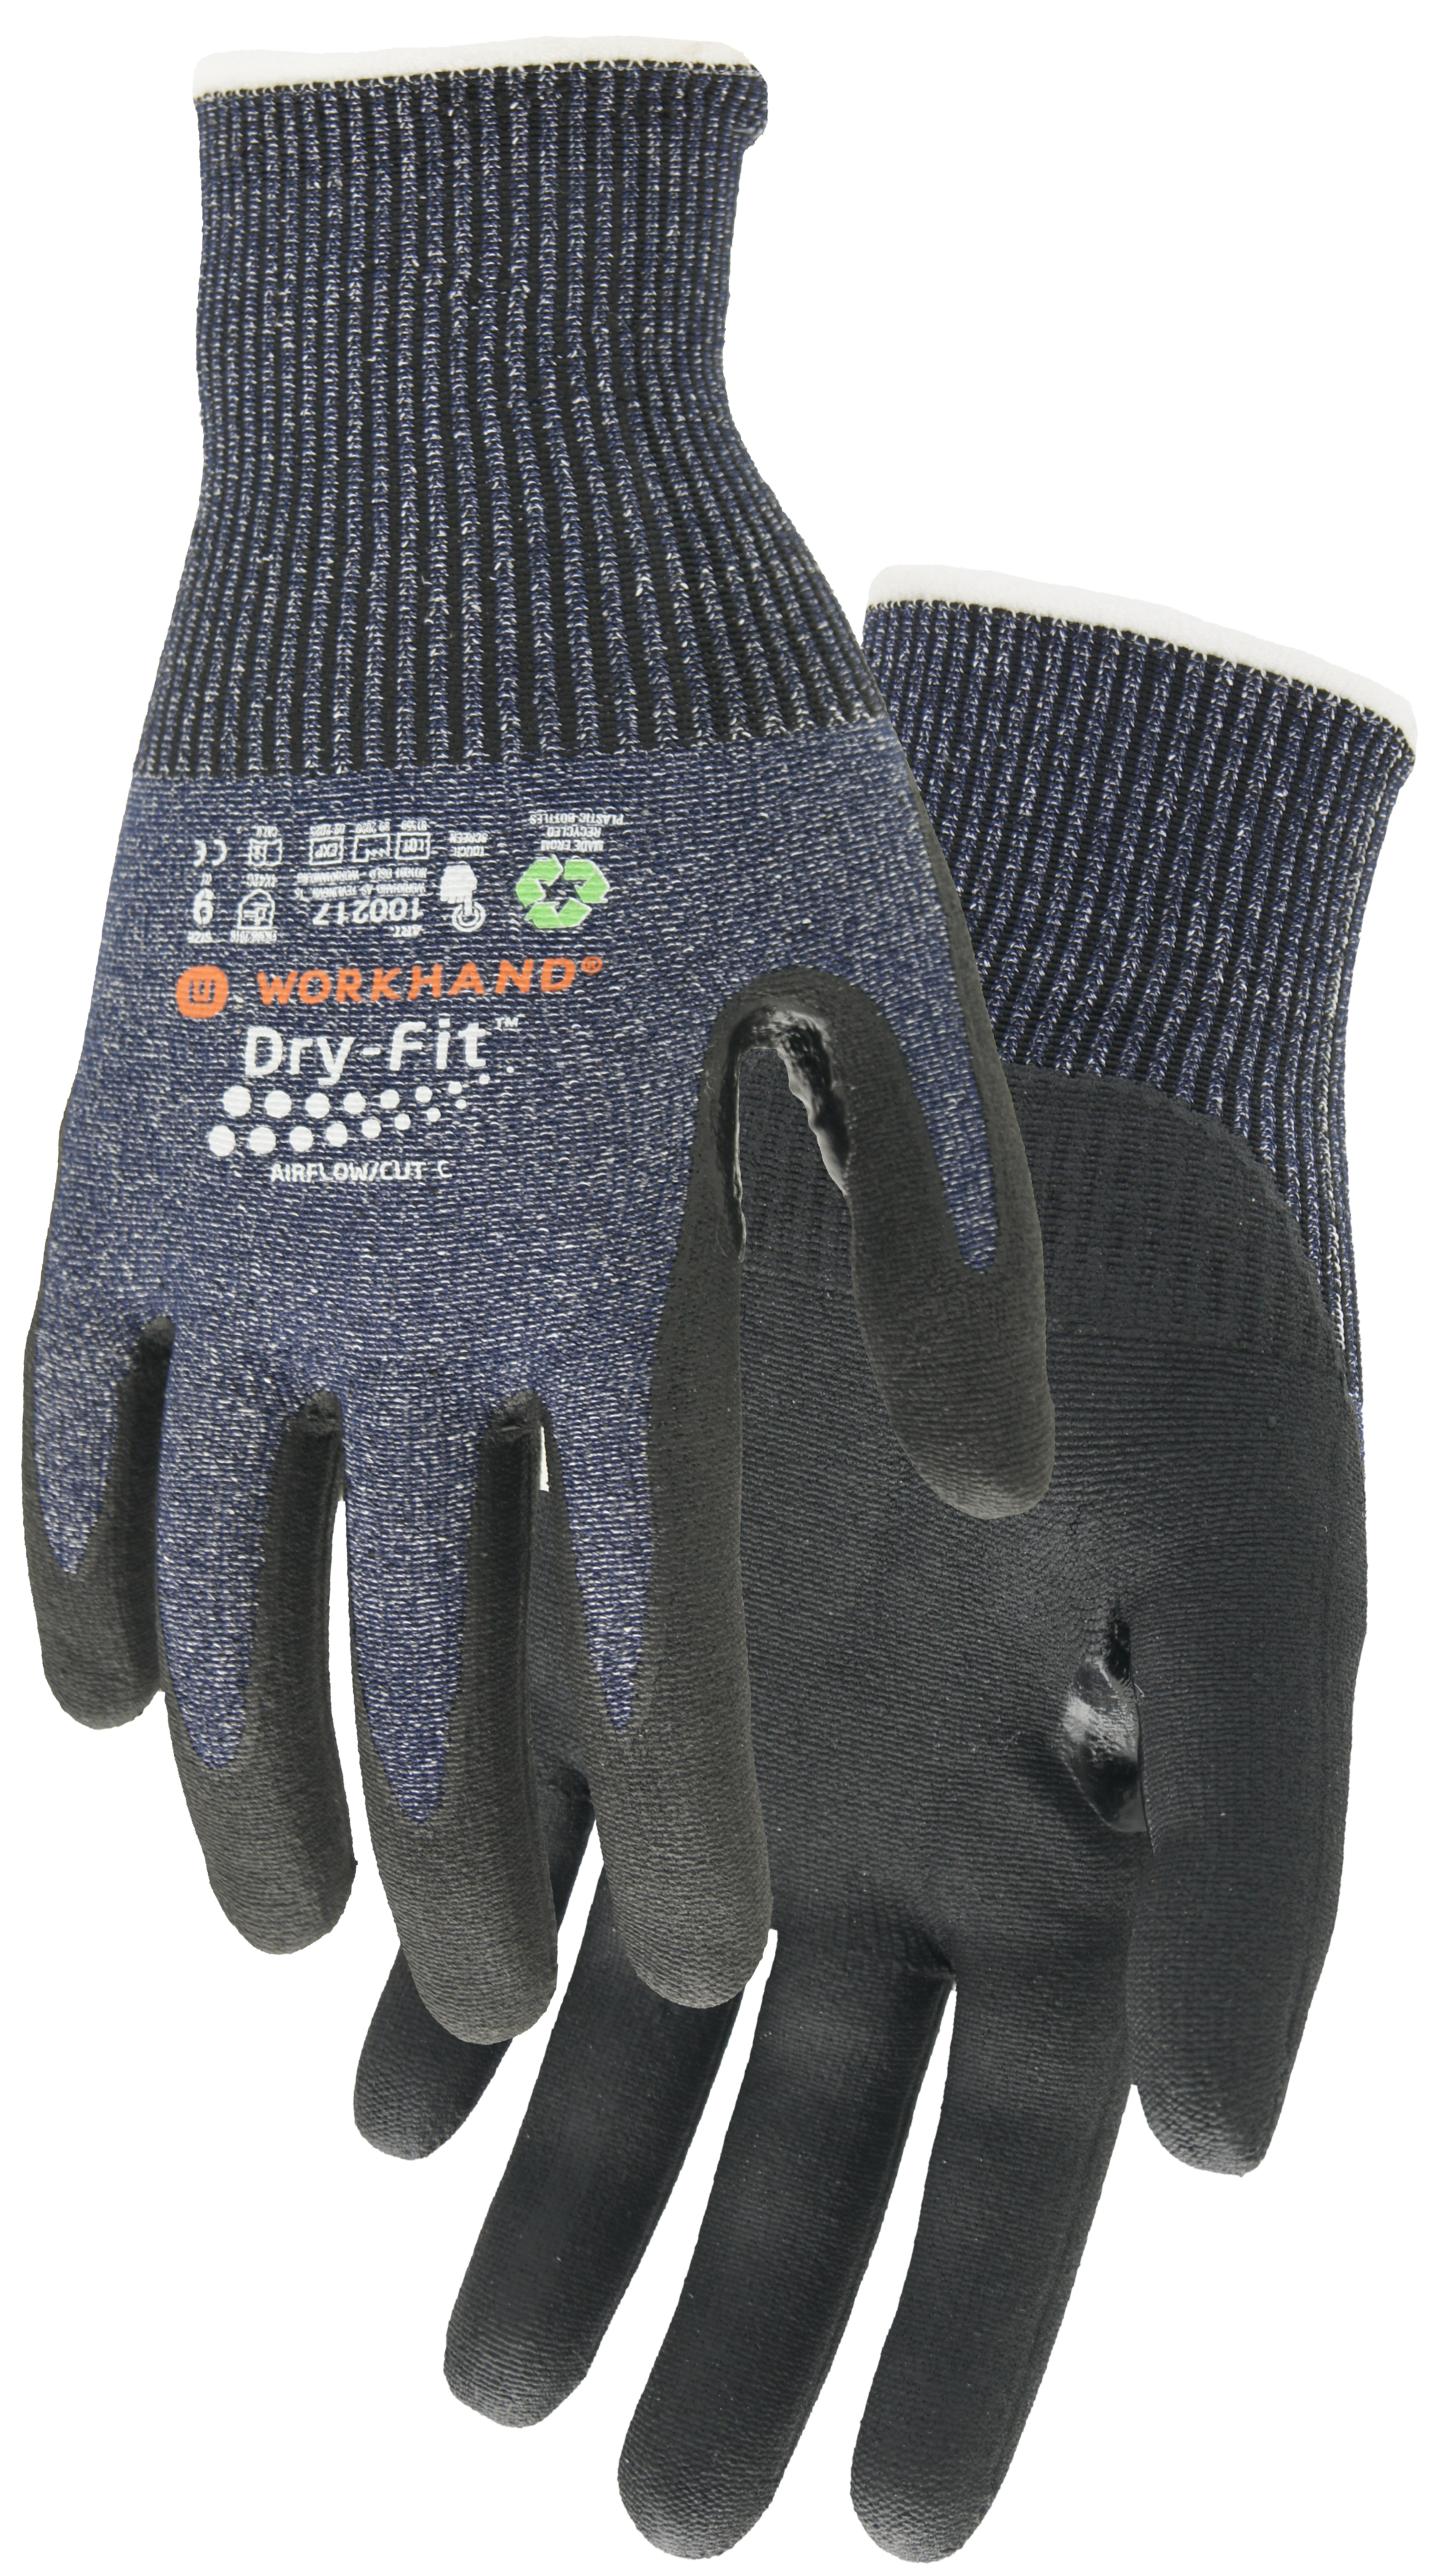 Workhand® Dry-Fit Airflow/Cut-C (608975)